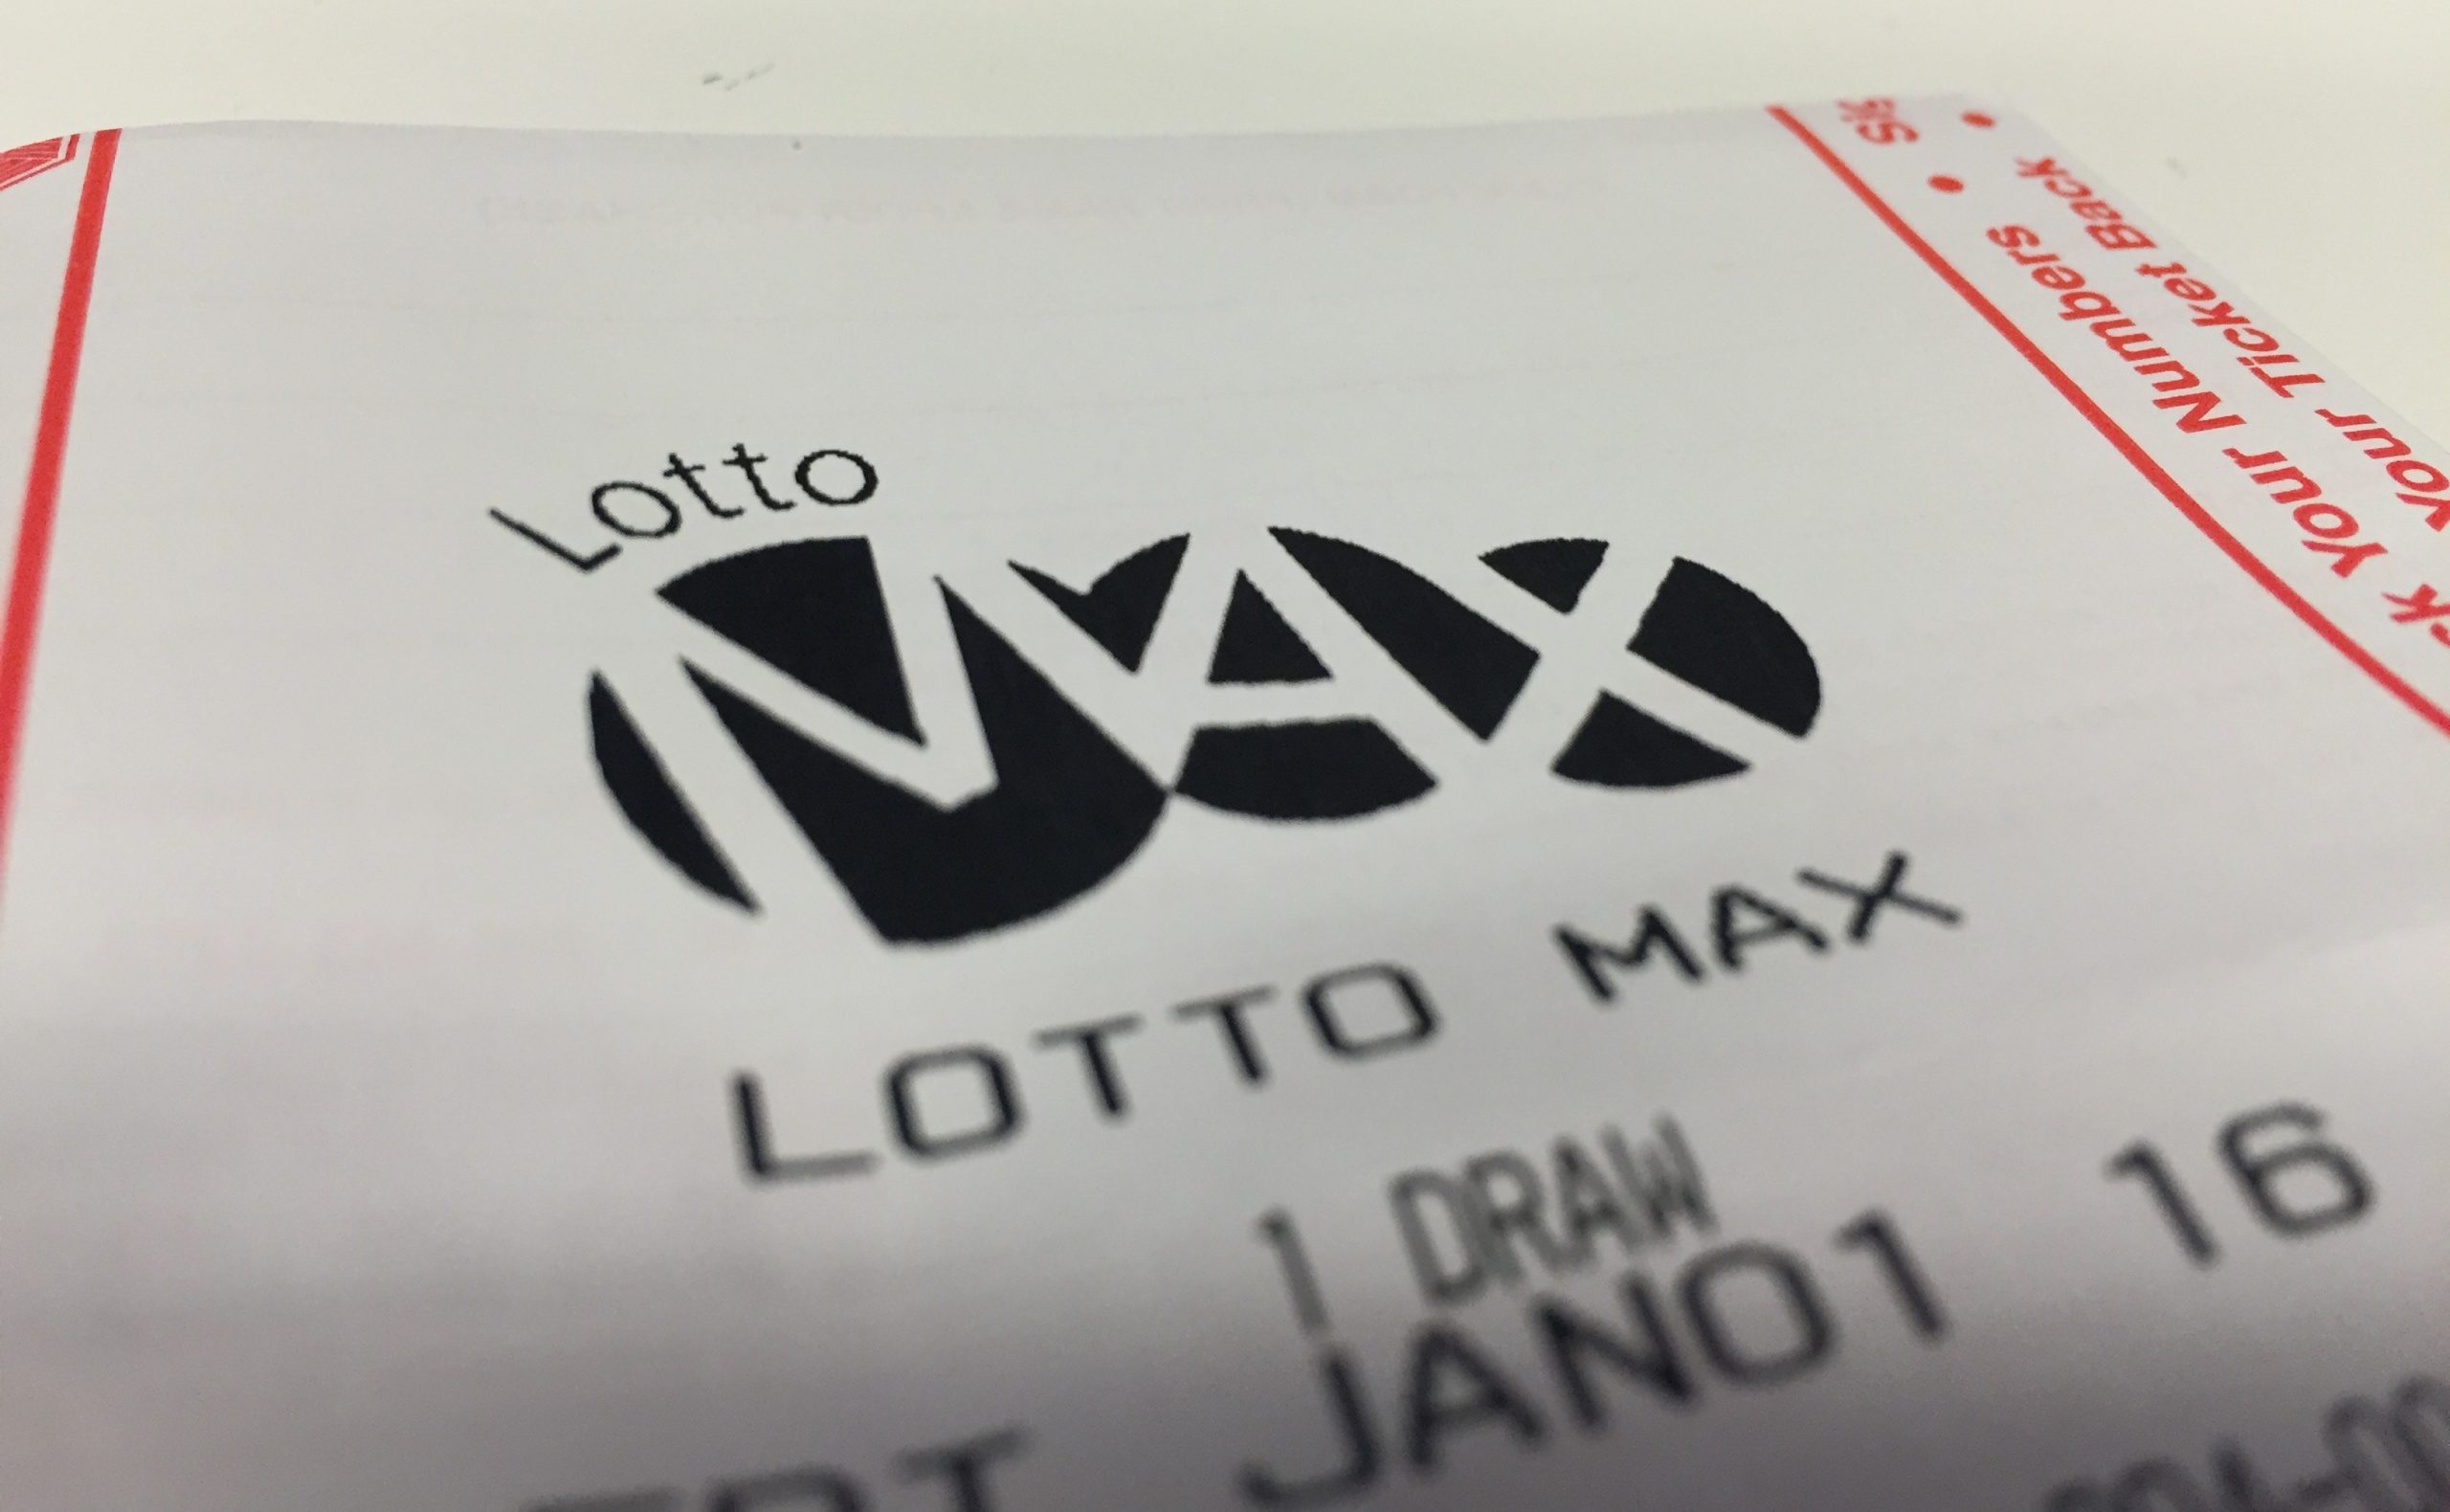 wclc lotto max numbers